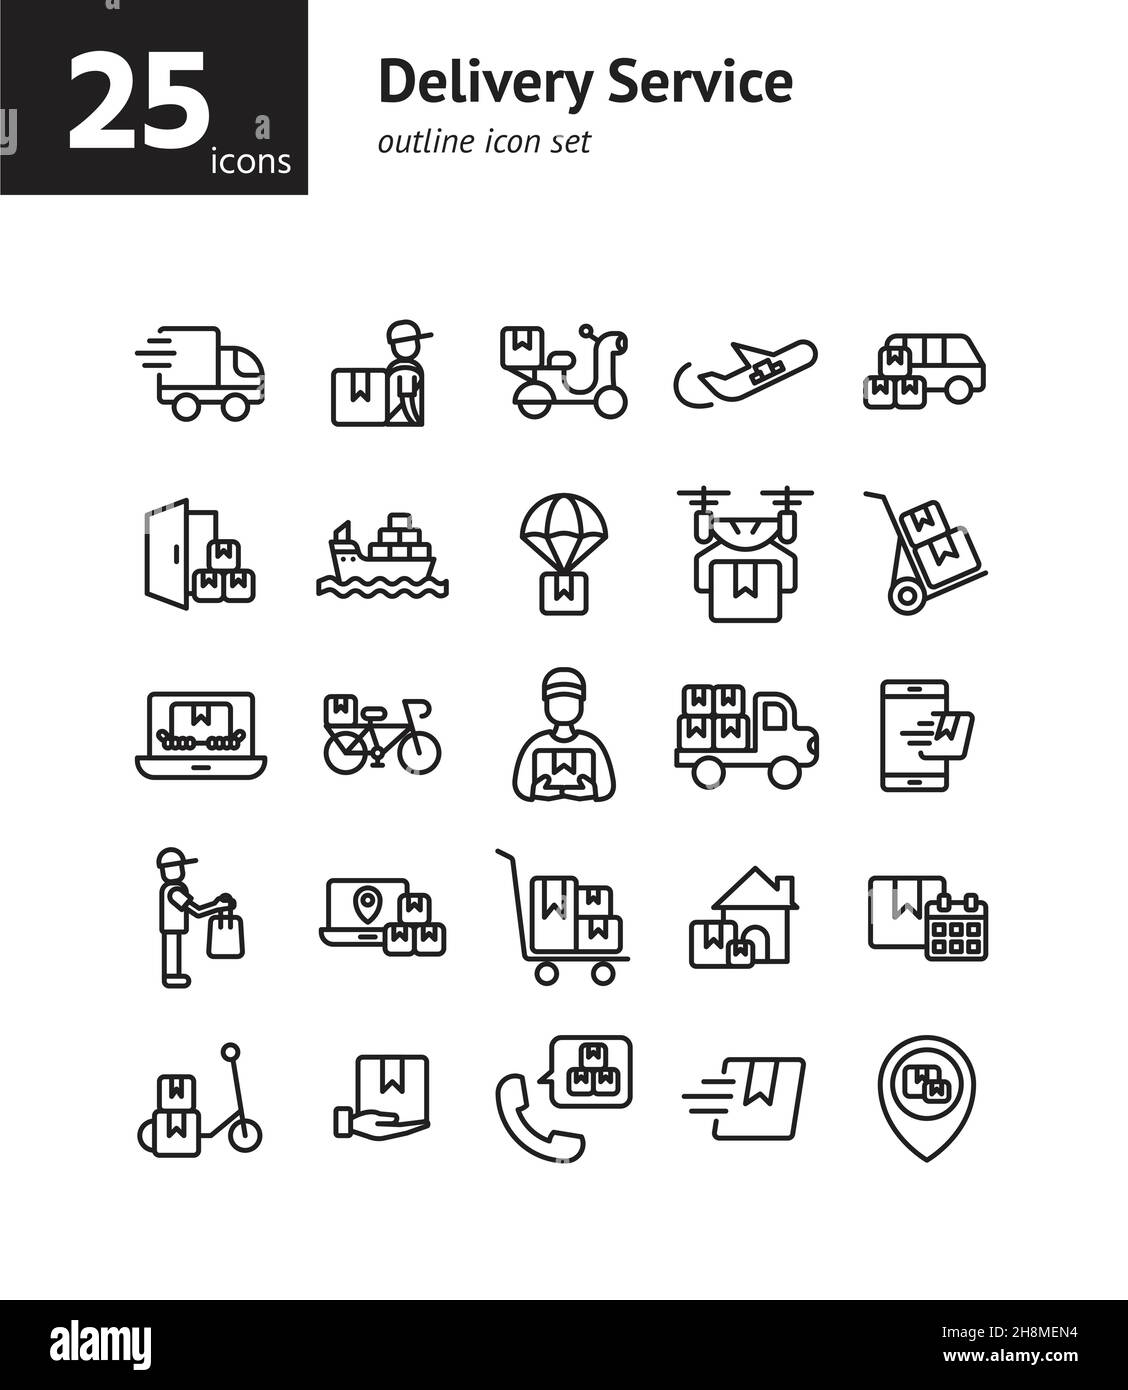 Delivery Service outline icon set. Vector and Illustration. Stock Vector